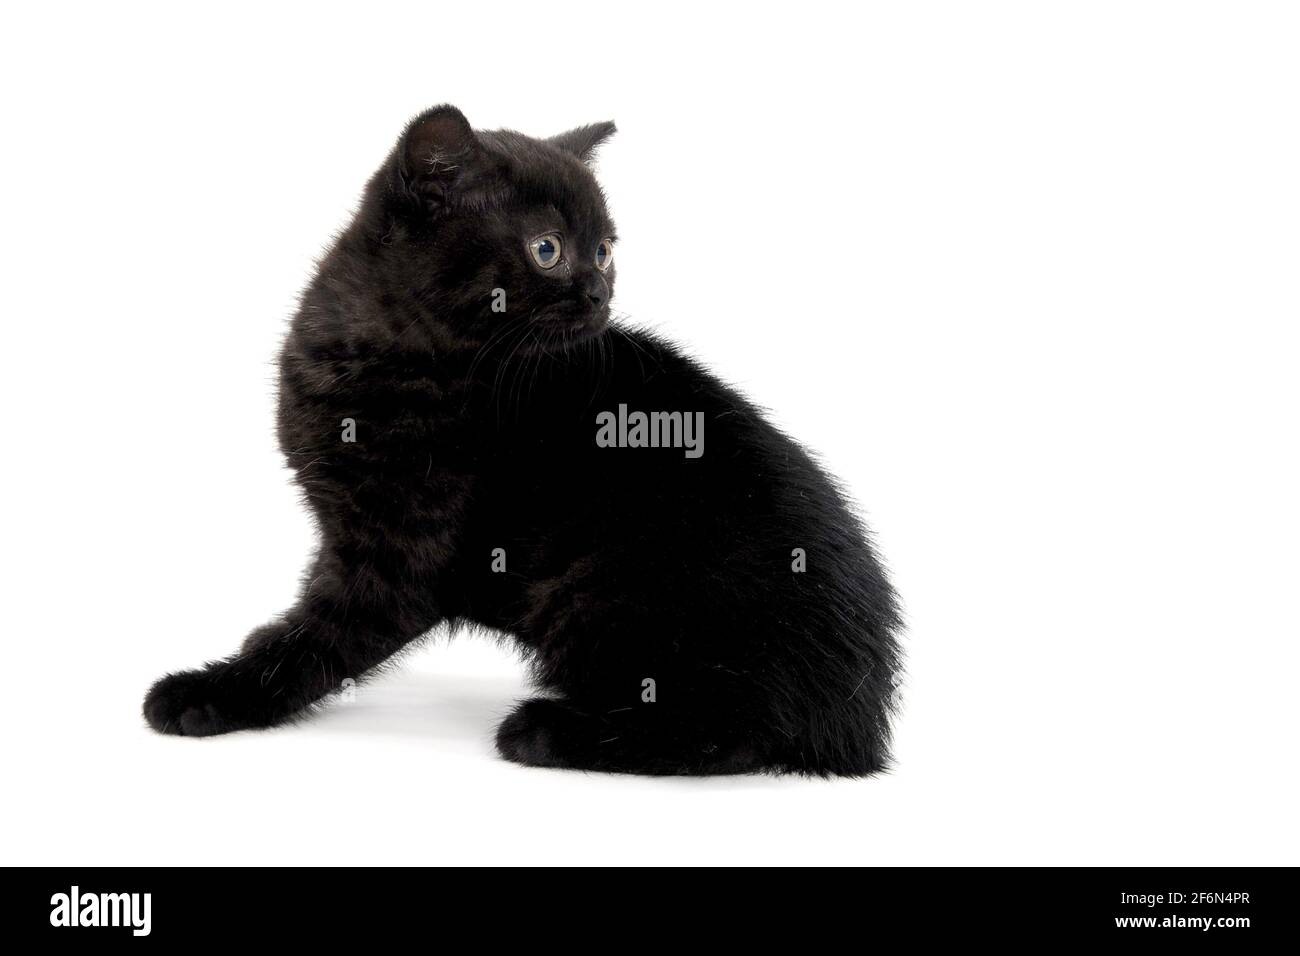 fluffy purebred black kitten with claws outstretched lies on an isolated background Stock Photo